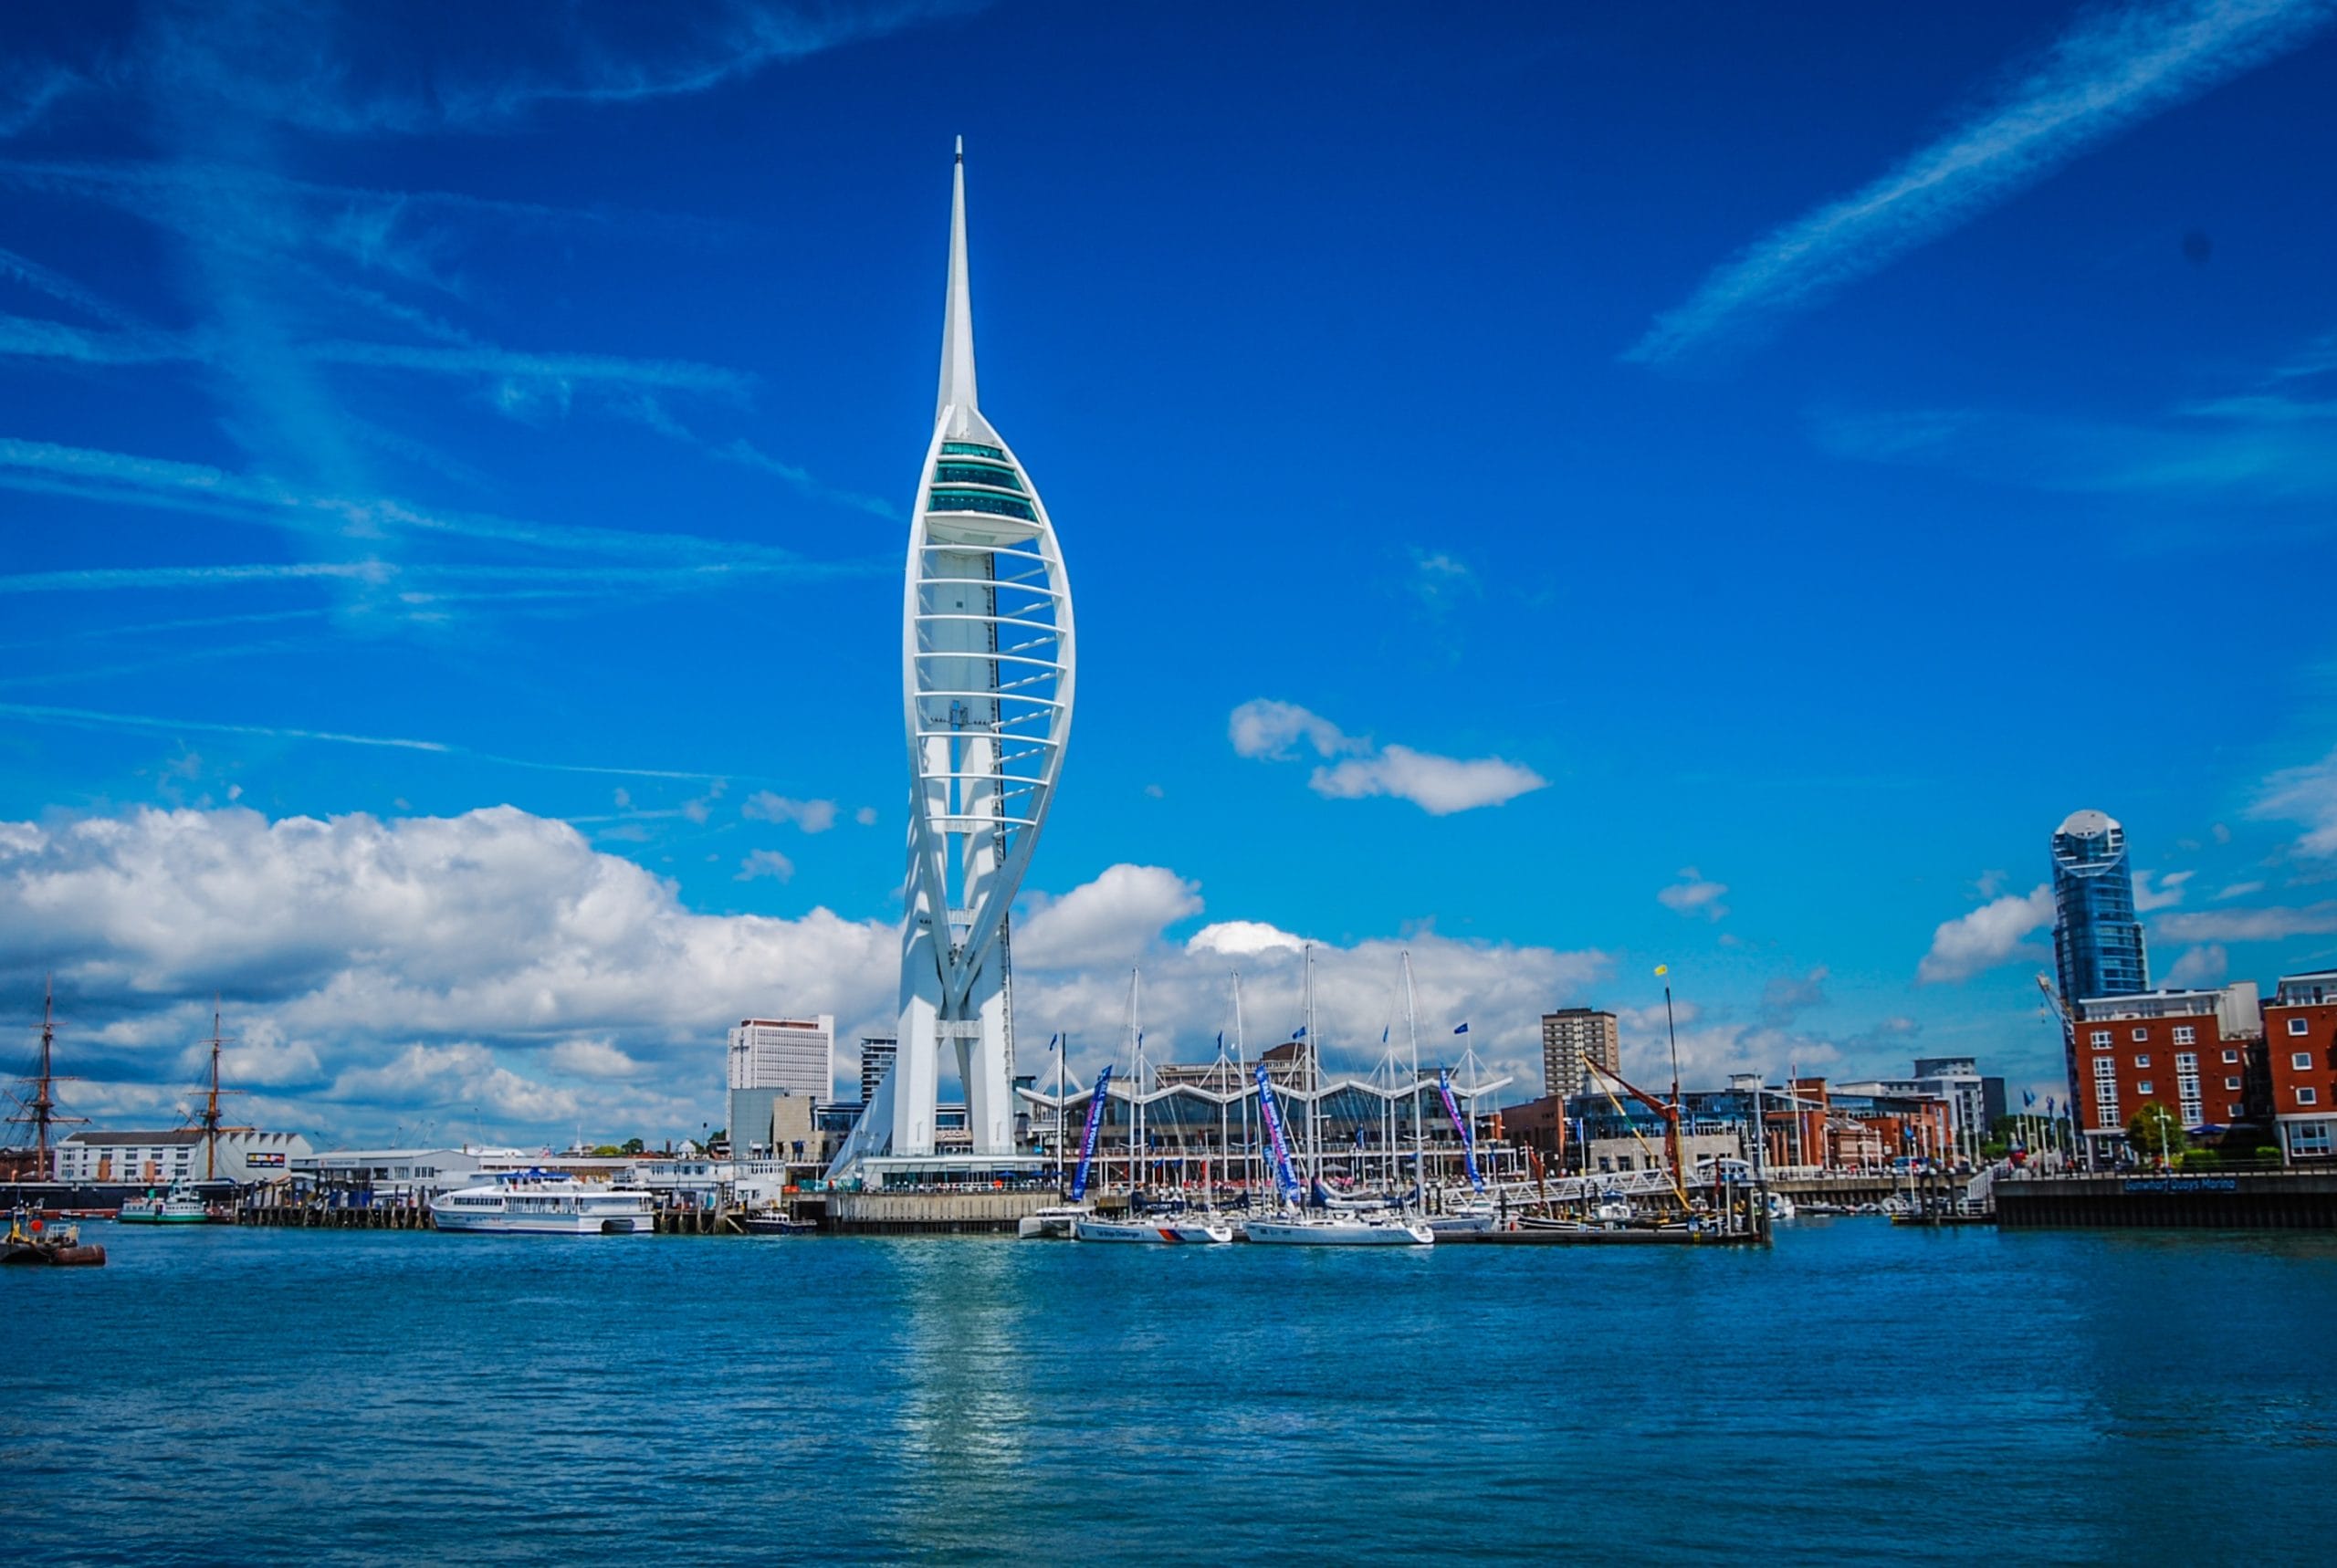 Spinnaker Tower in Portsmouth England